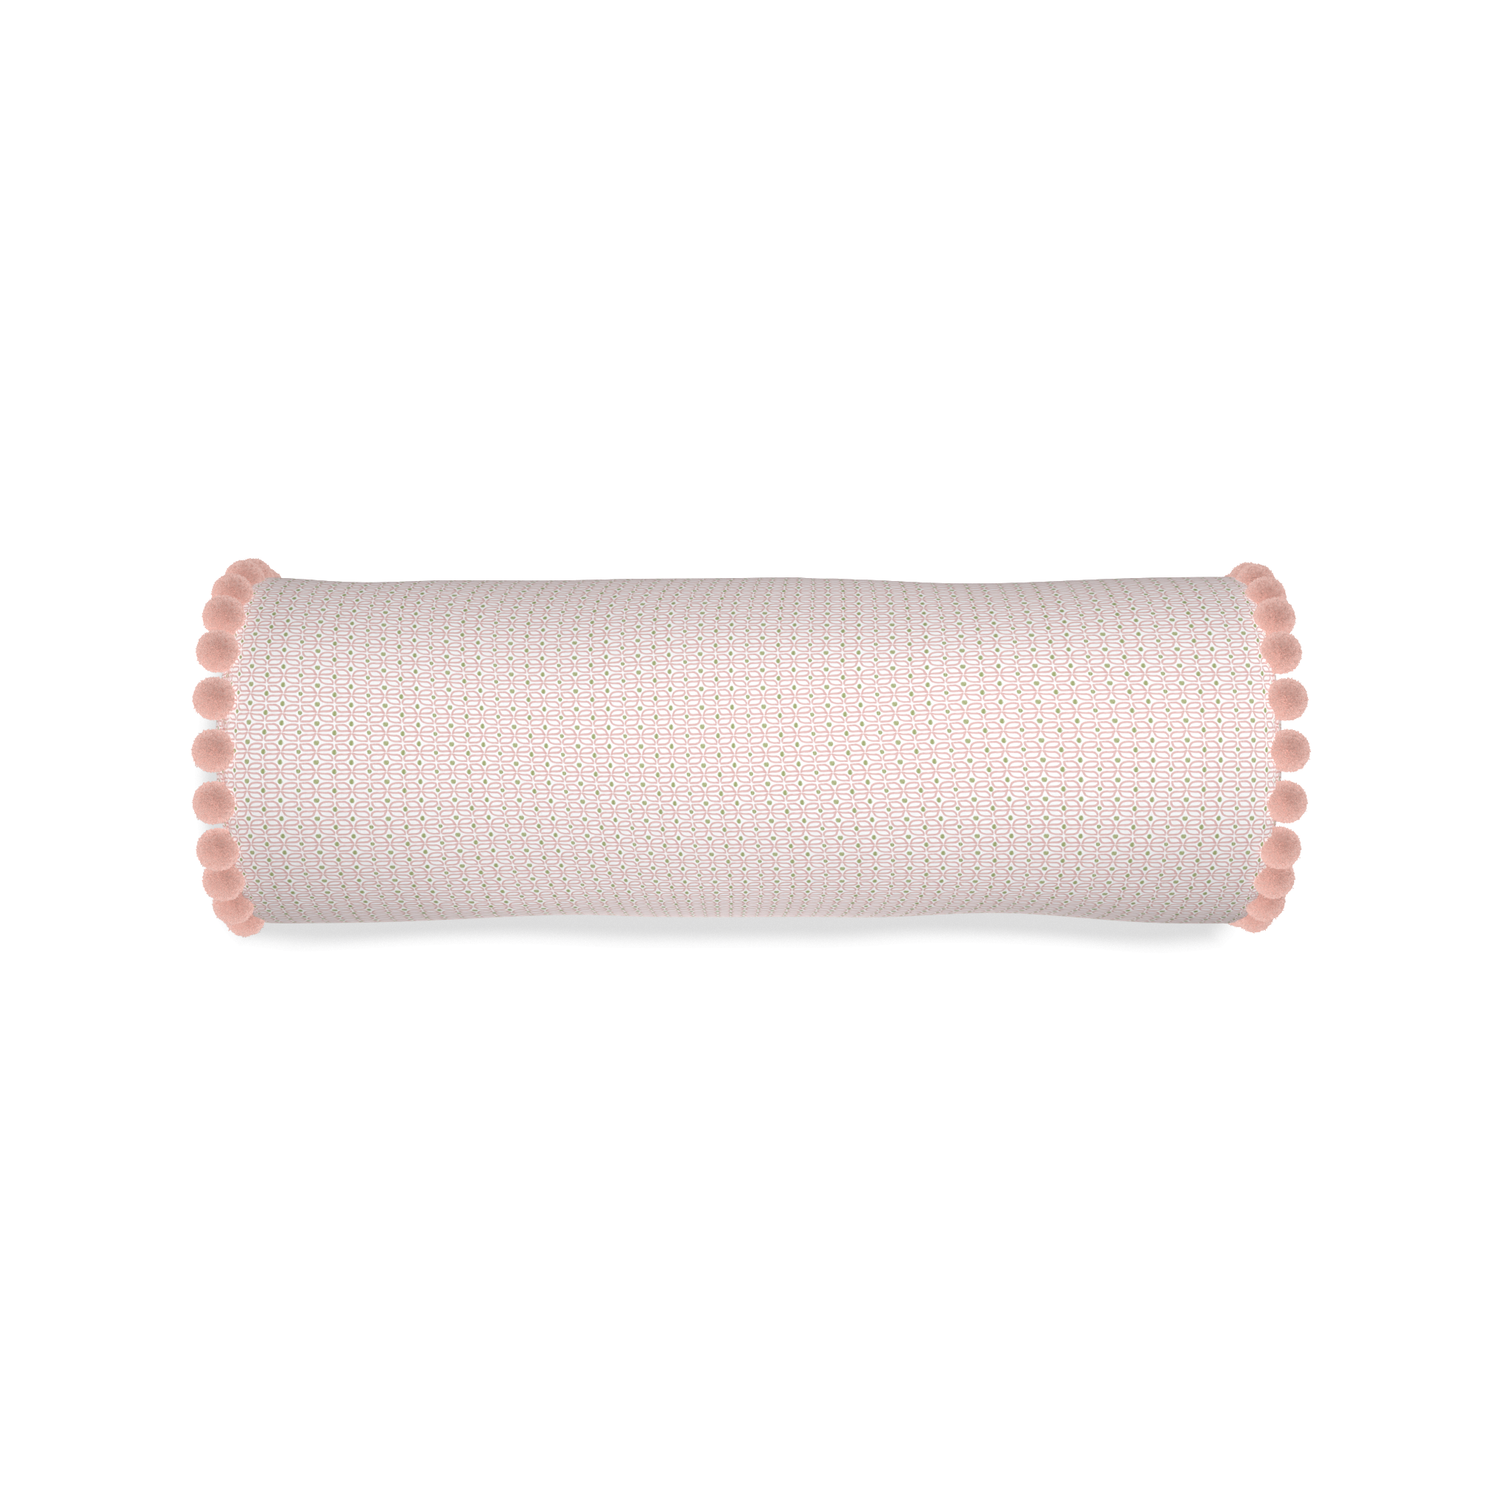 Bolster loomi pink custom pink geometricpillow with rose pom pom on white background